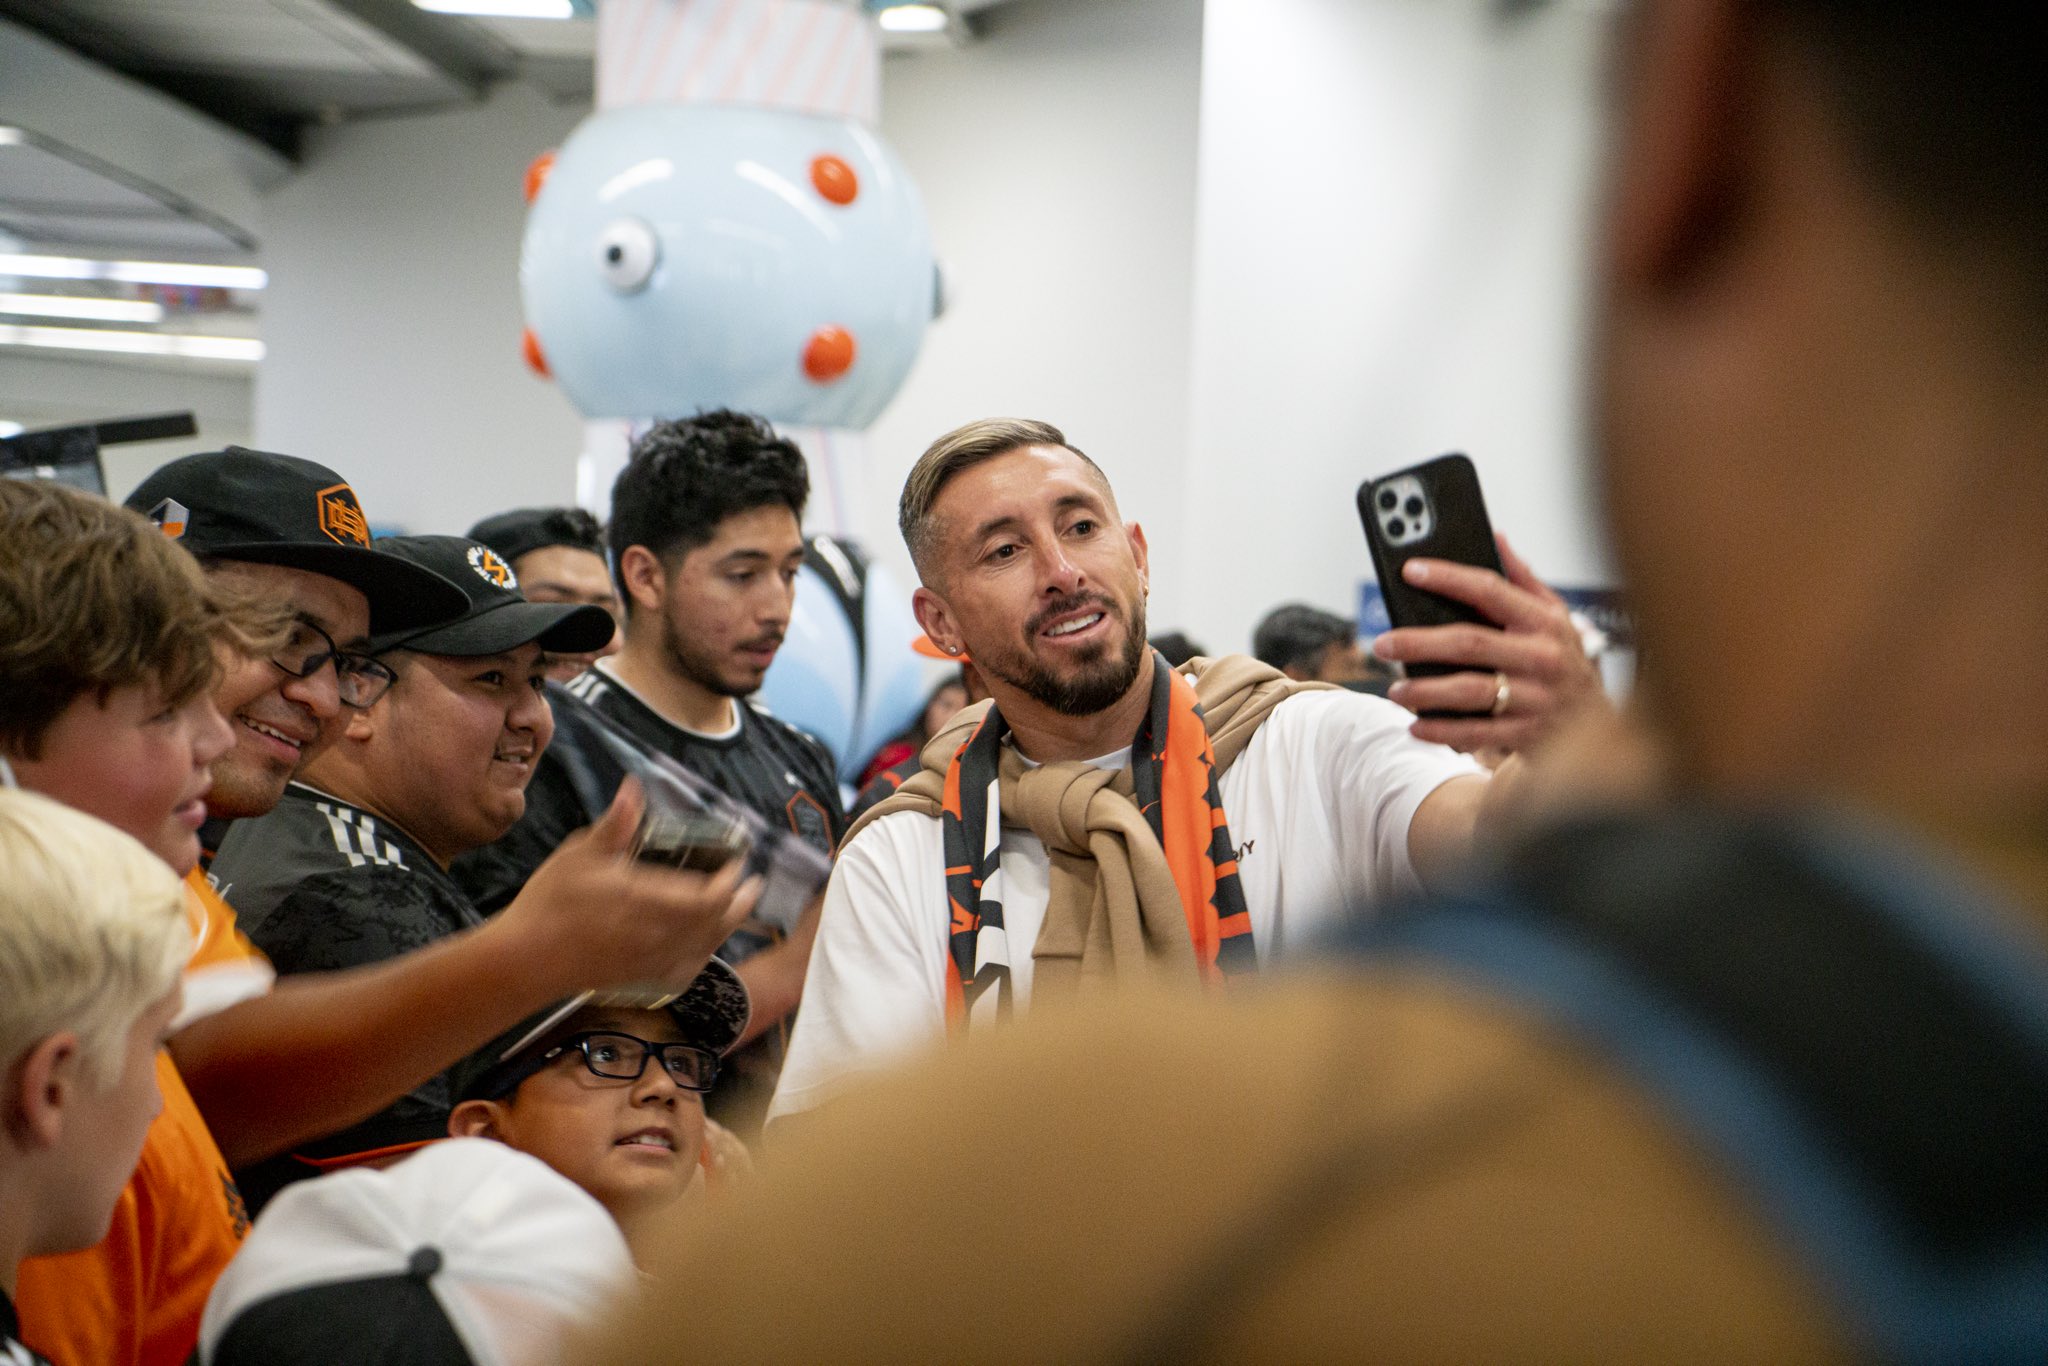 MLS fans chanted the Mexican player's name as soon as they saw him arrive (Image: Twitter / @ HoustonDynamo)